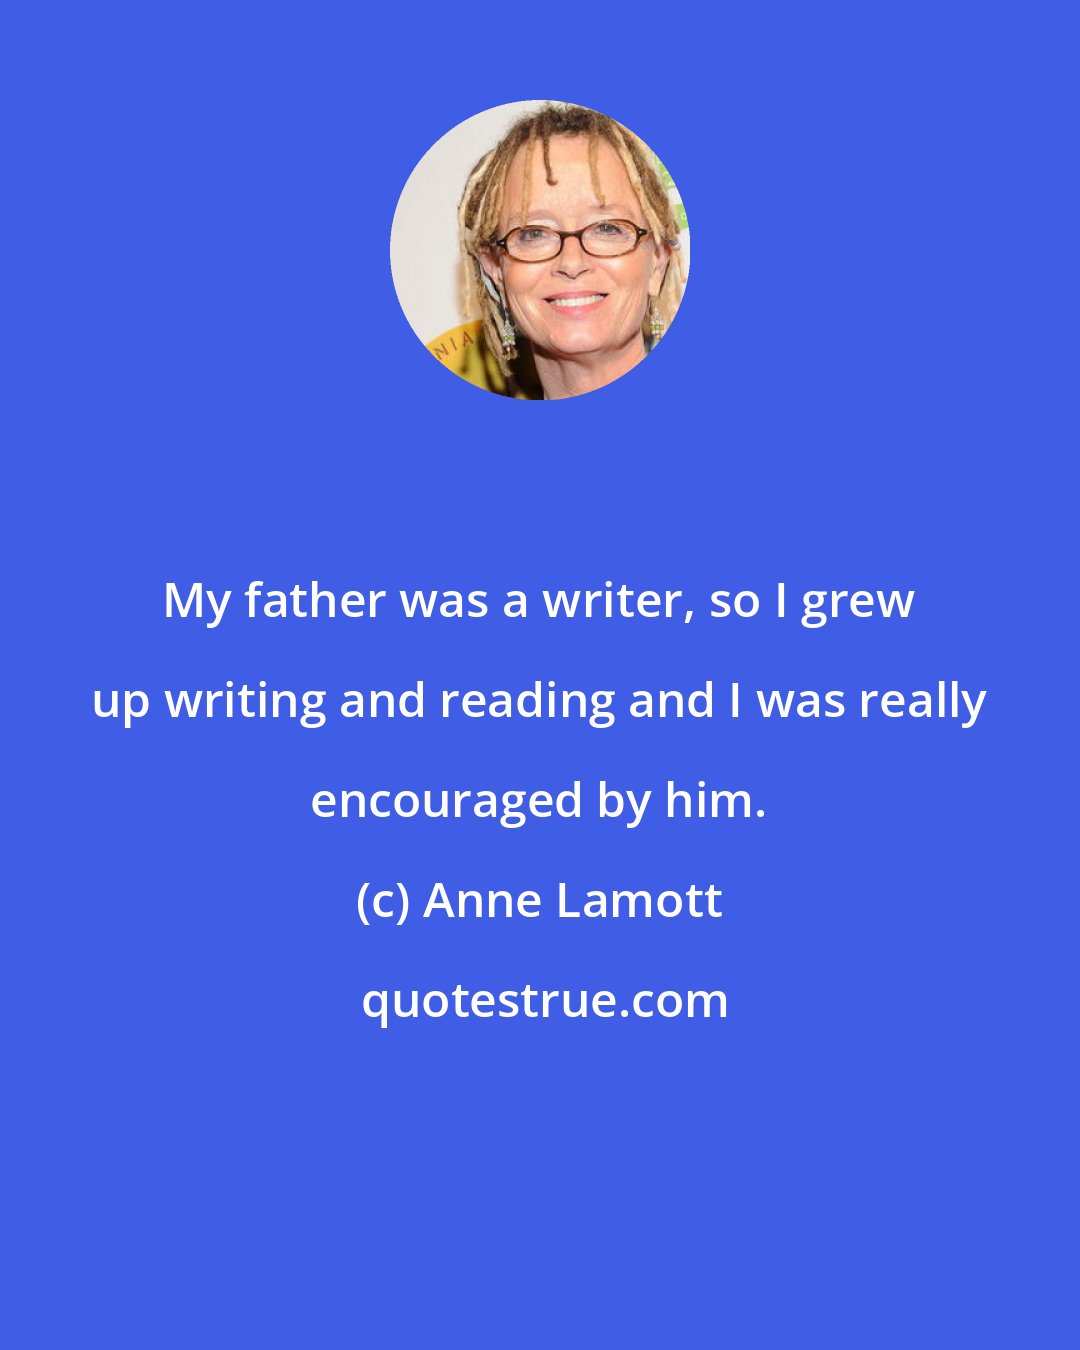 Anne Lamott: My father was a writer, so I grew up writing and reading and I was really encouraged by him.